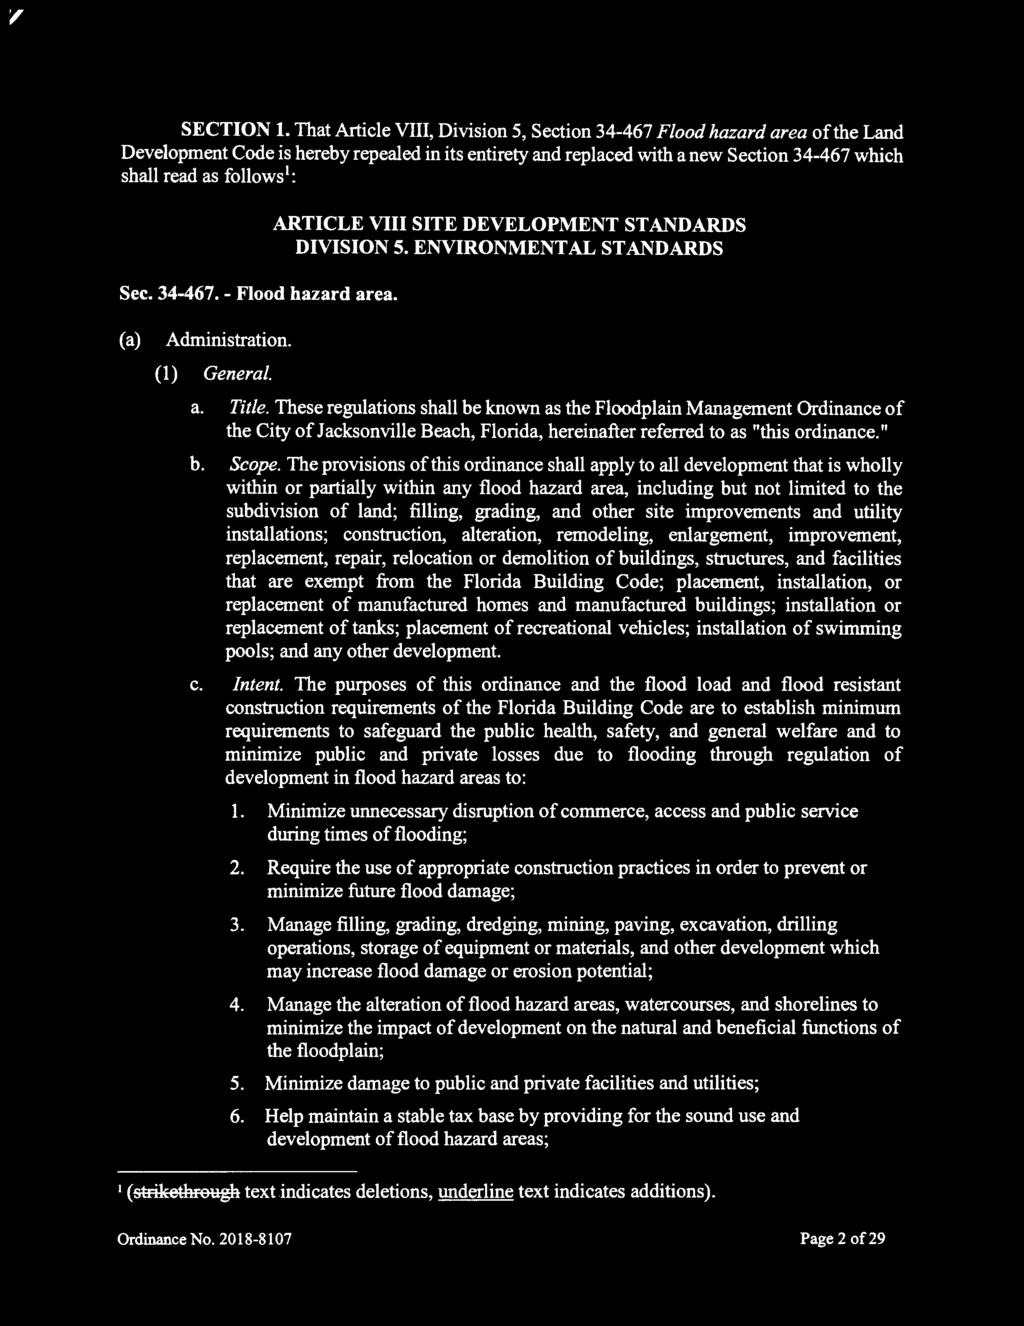 Sec. 34-467. - Flood hazard area. ARTICLE VIII SITE DEVELOPMENT STANDARDS DIVISION 5. ENVIRONMENTAL ST AND ARDS (a) Administration. (1) General. a. Title.